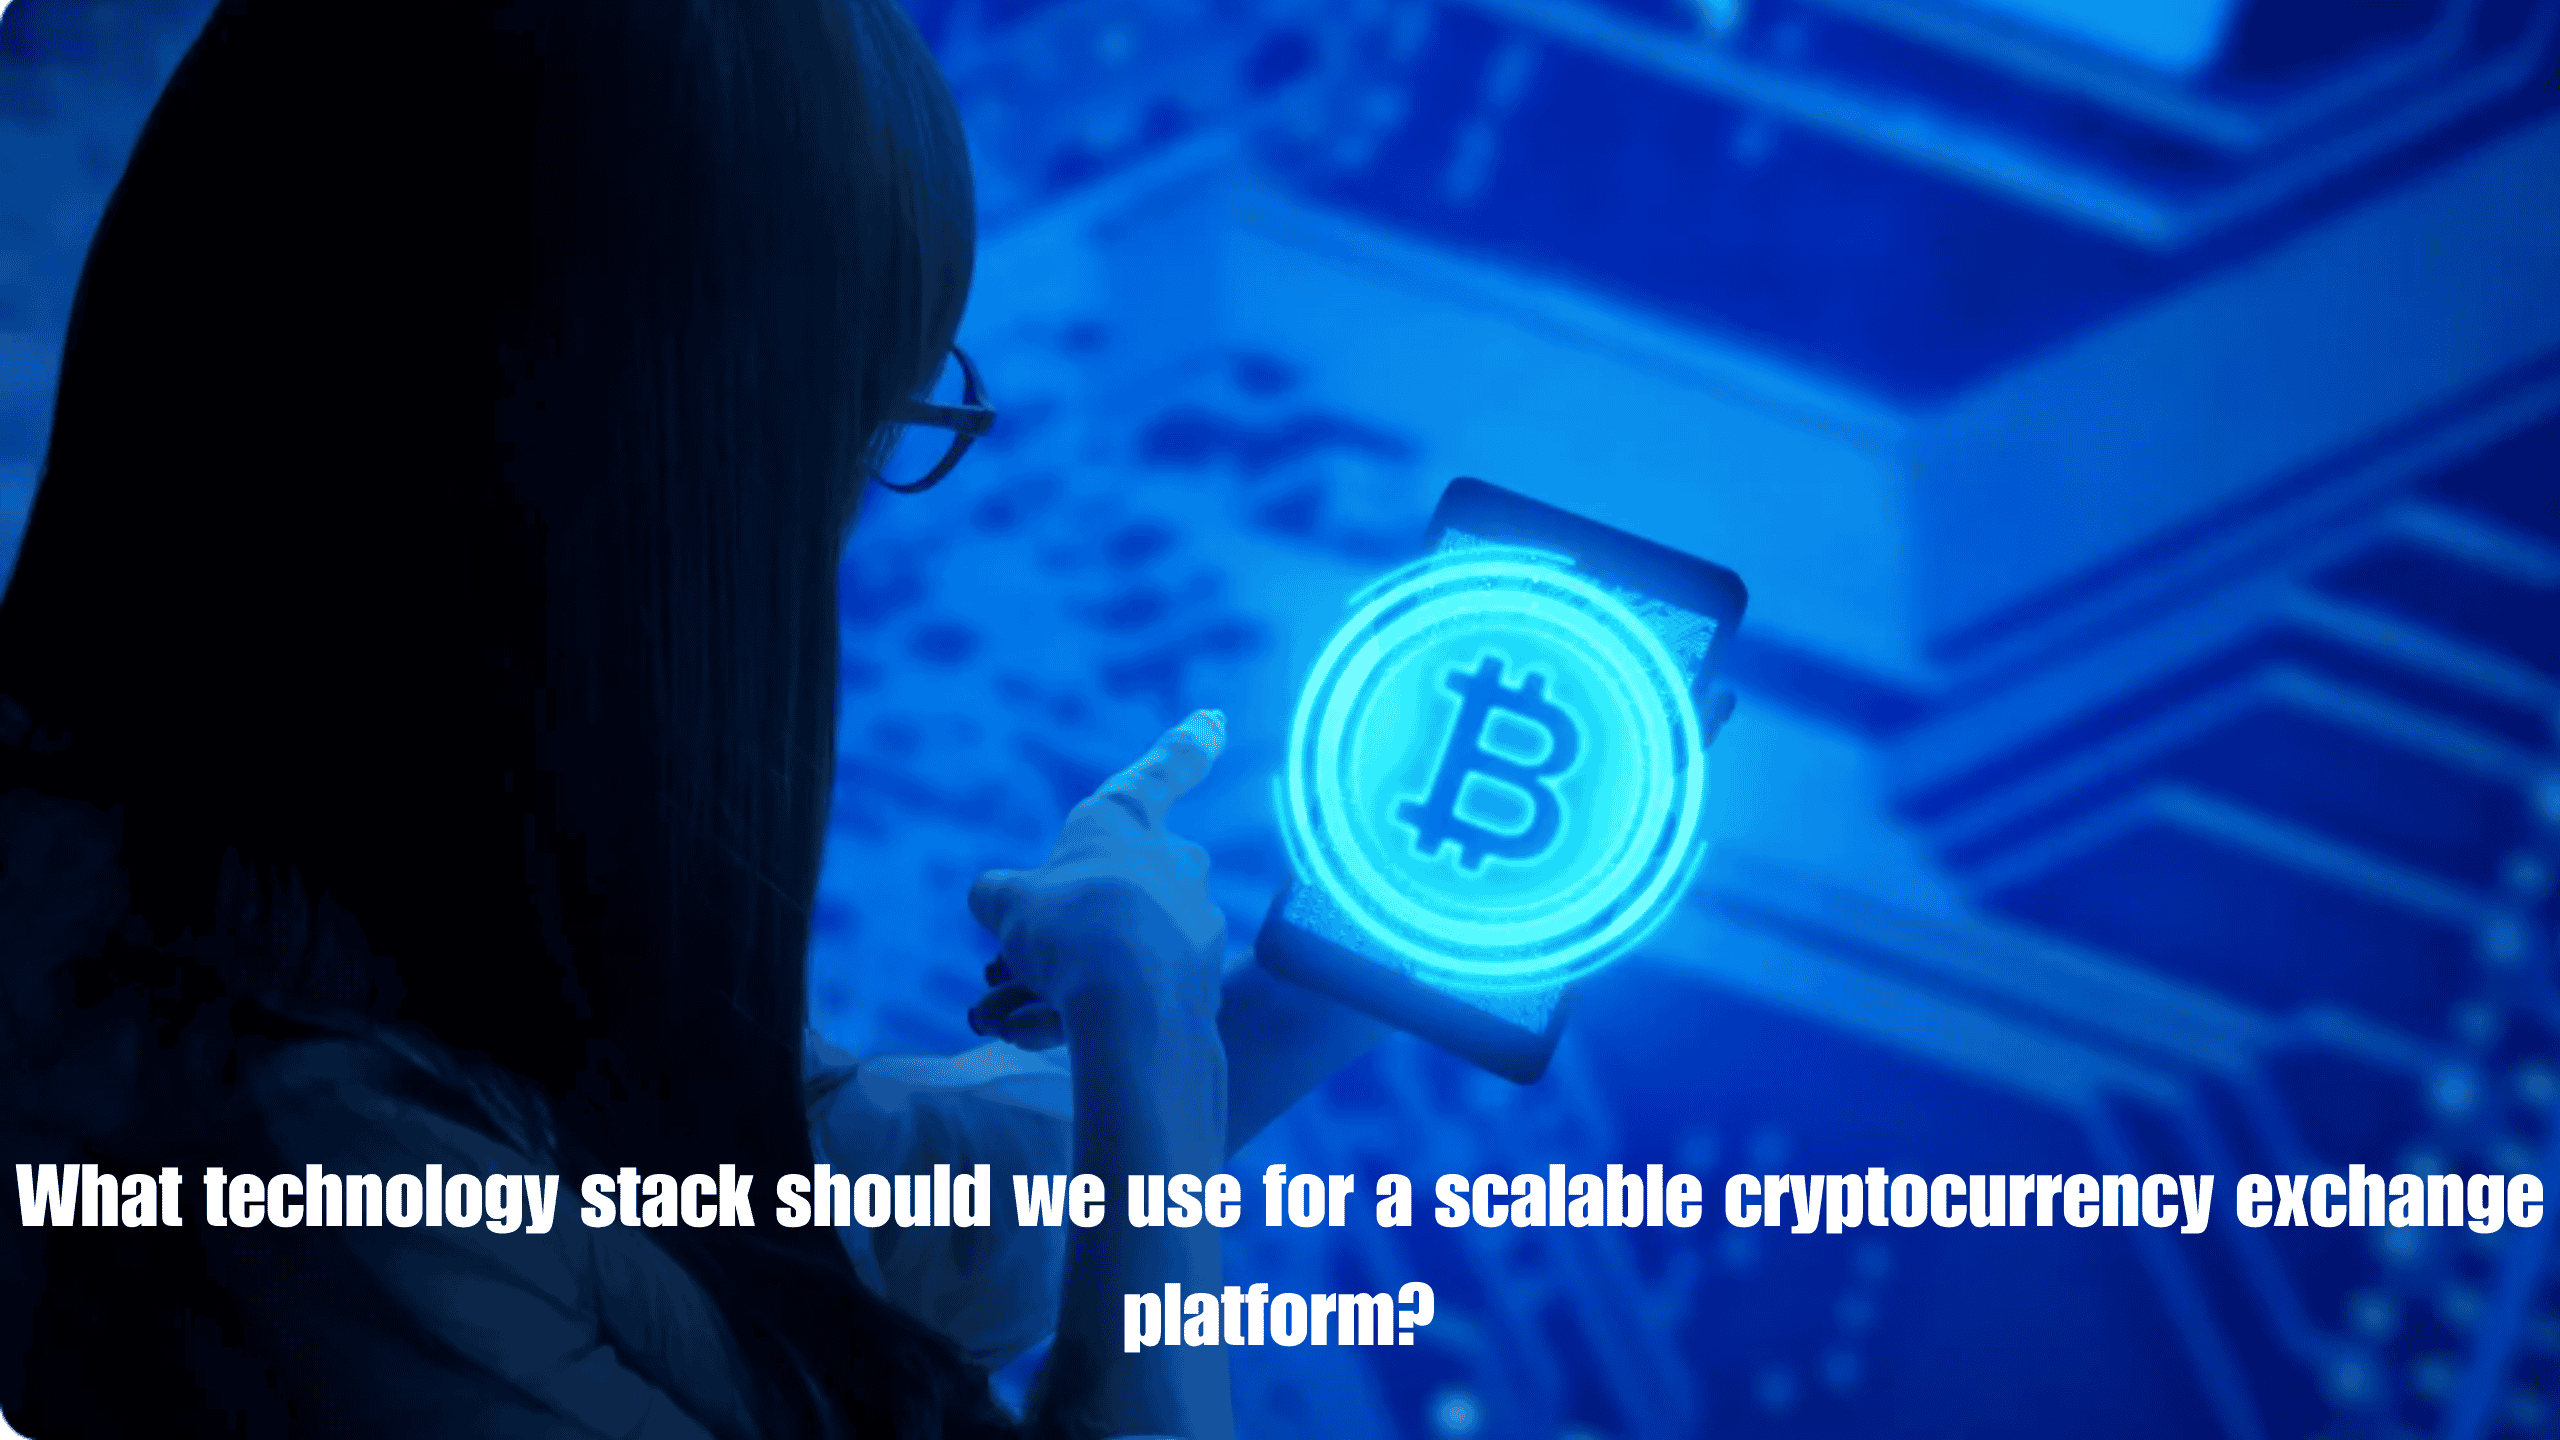 What technology stack should we use for a scalable cryptocurrency exchange platform?